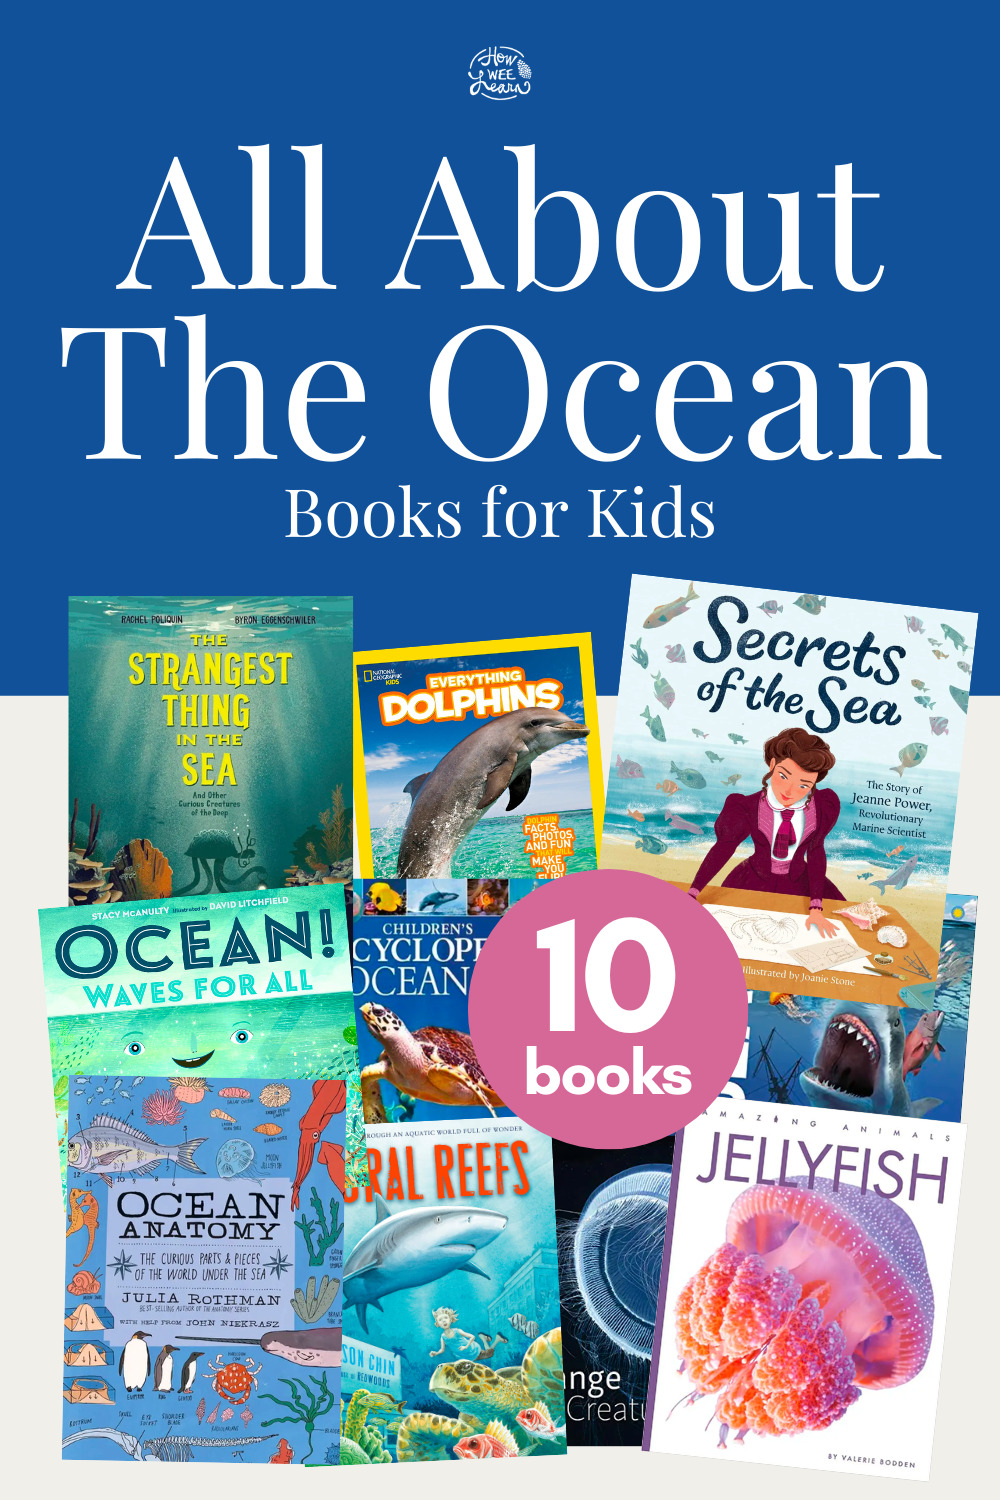 All About the Ocean: 10 Books for Kids